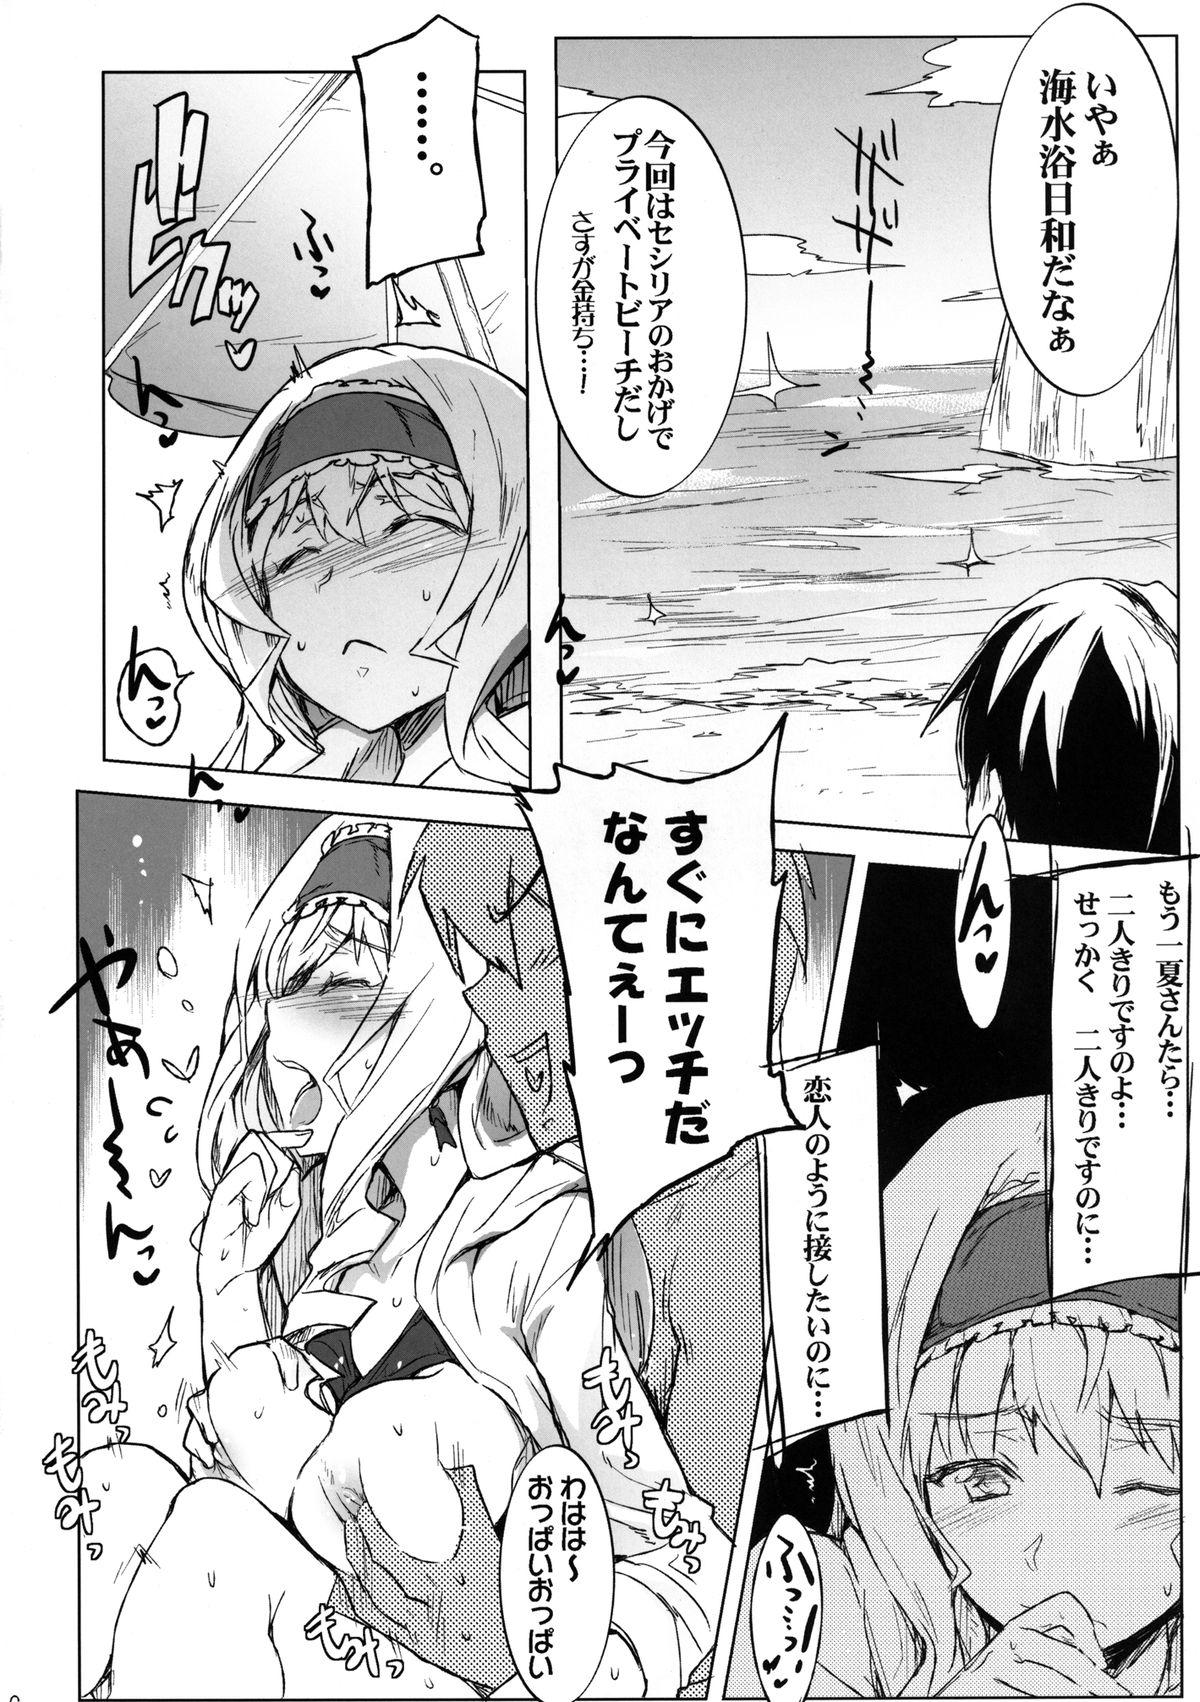 Women IS Girls 2 - Infinite stratos Gay College - Page 6